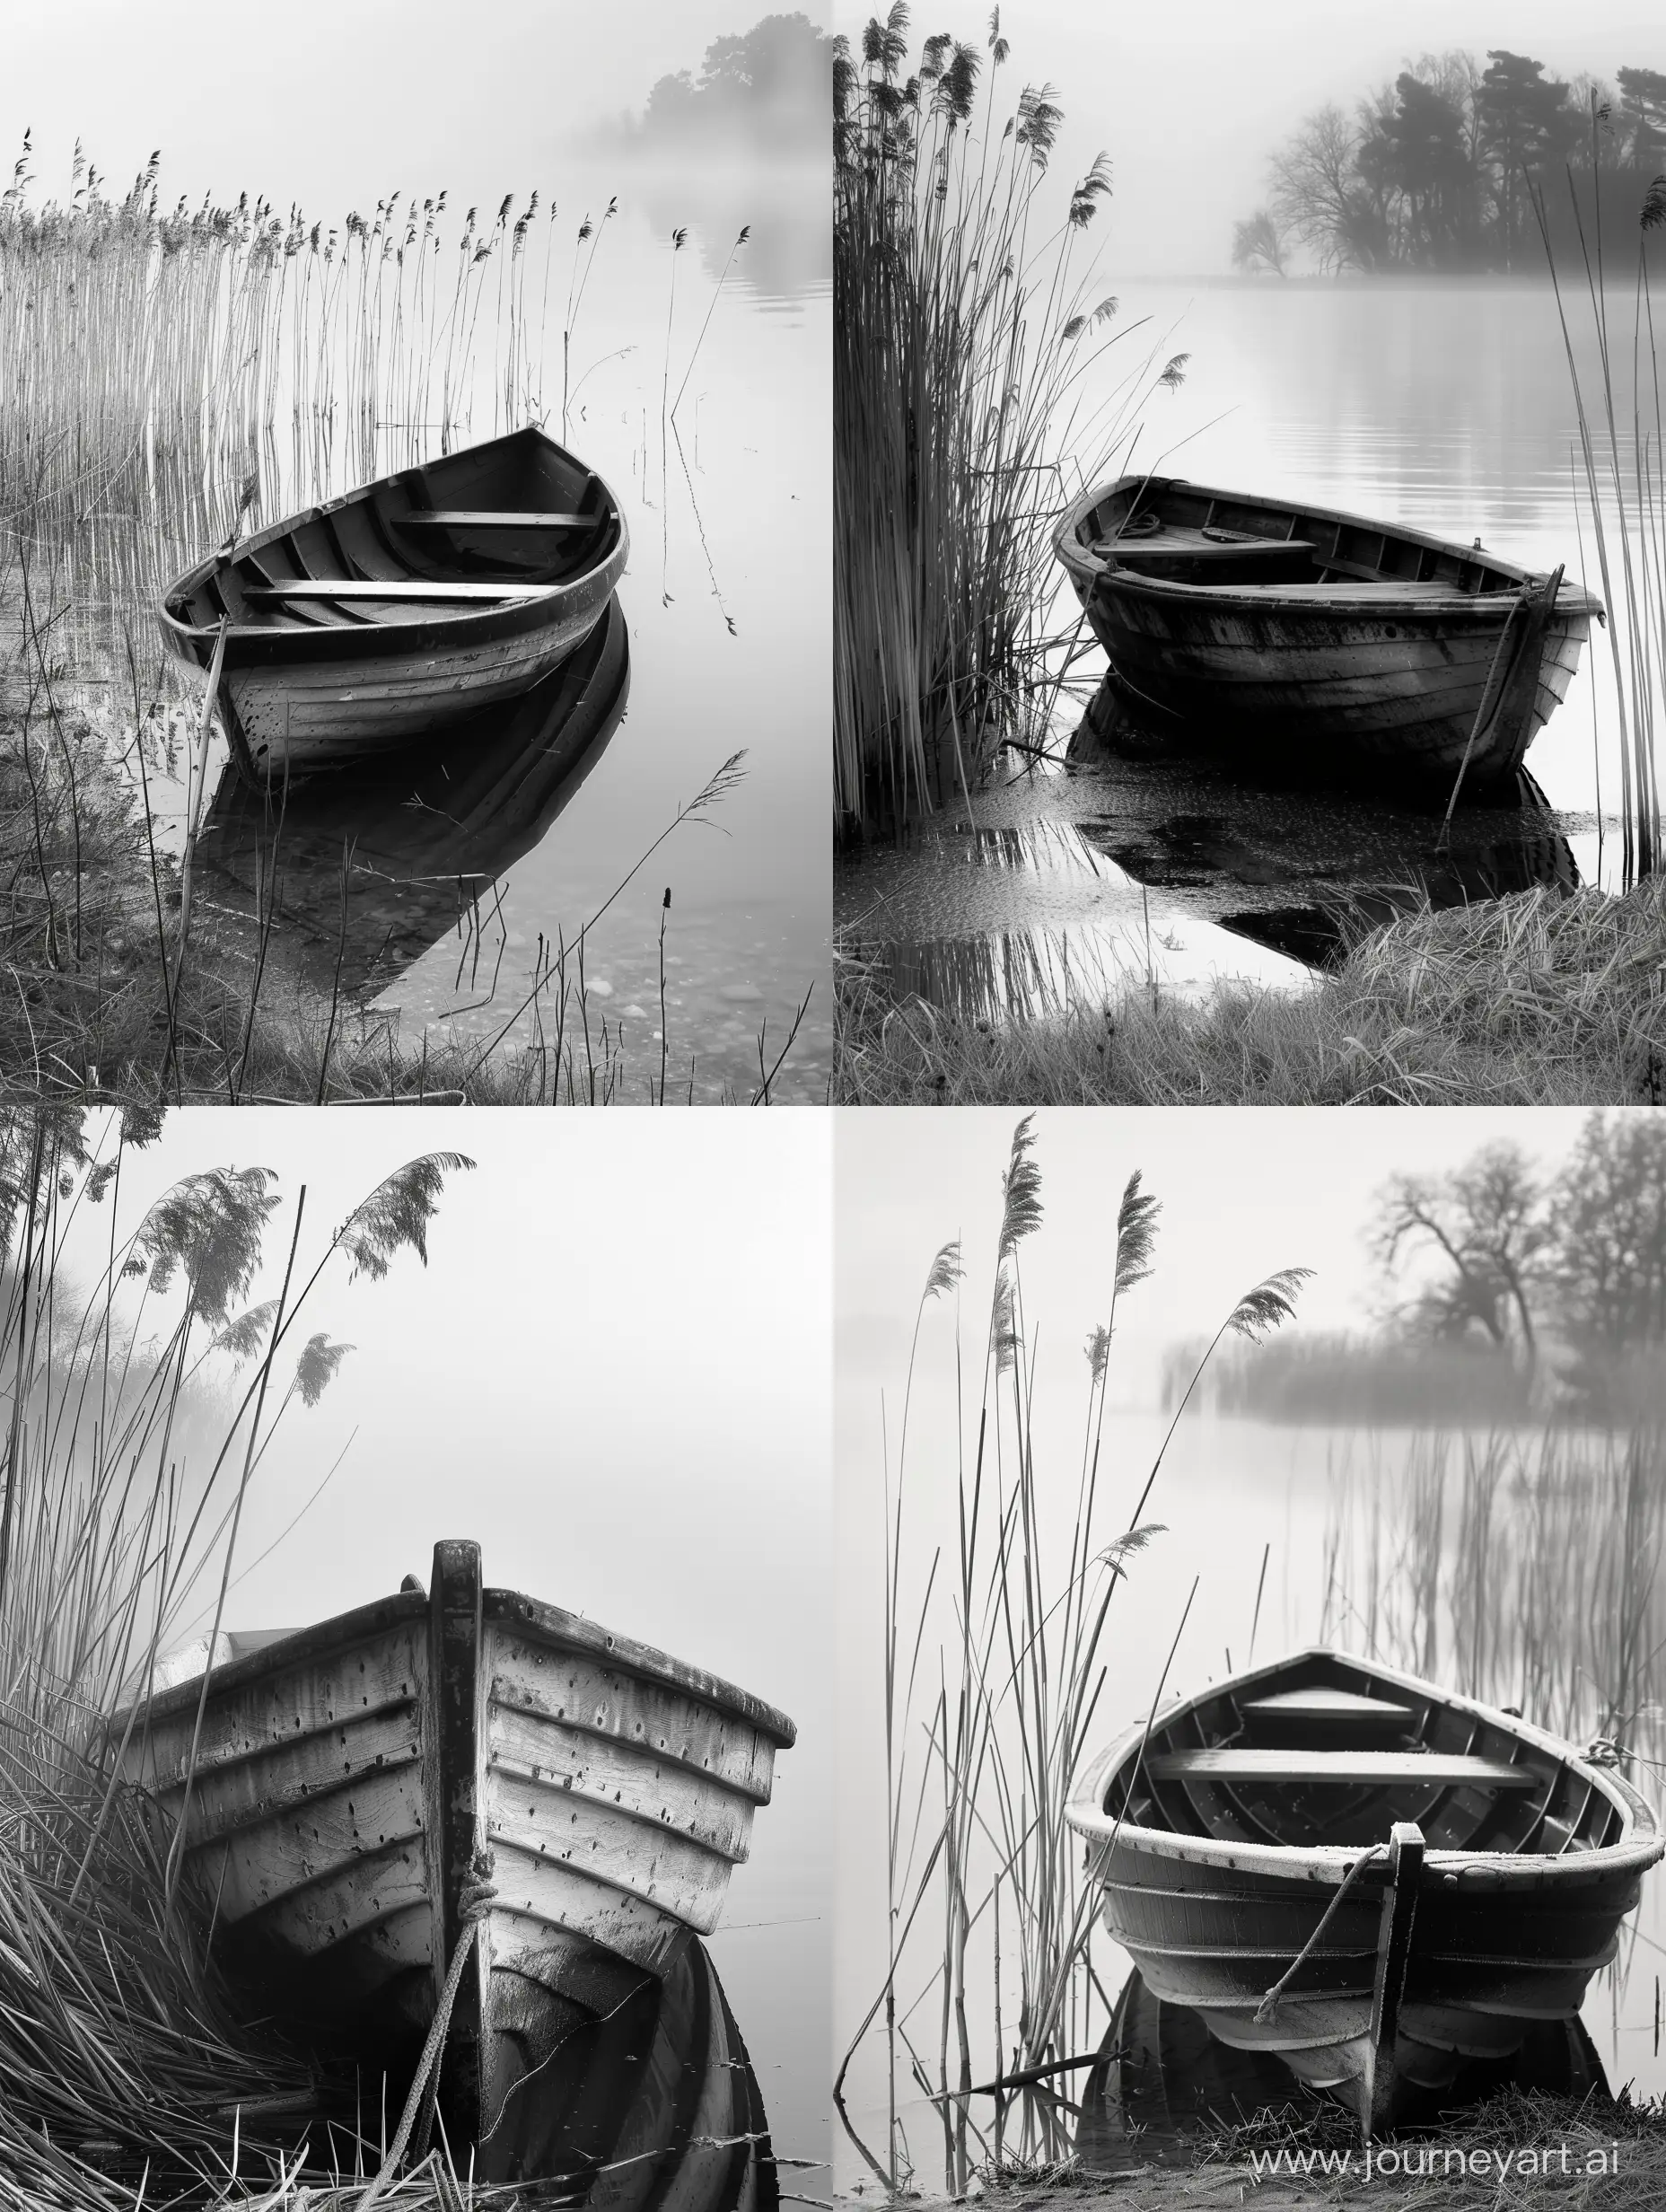 Tranquil-Misty-Lake-Shore-with-Wooden-Boat-and-Reeds-in-Black-and-White